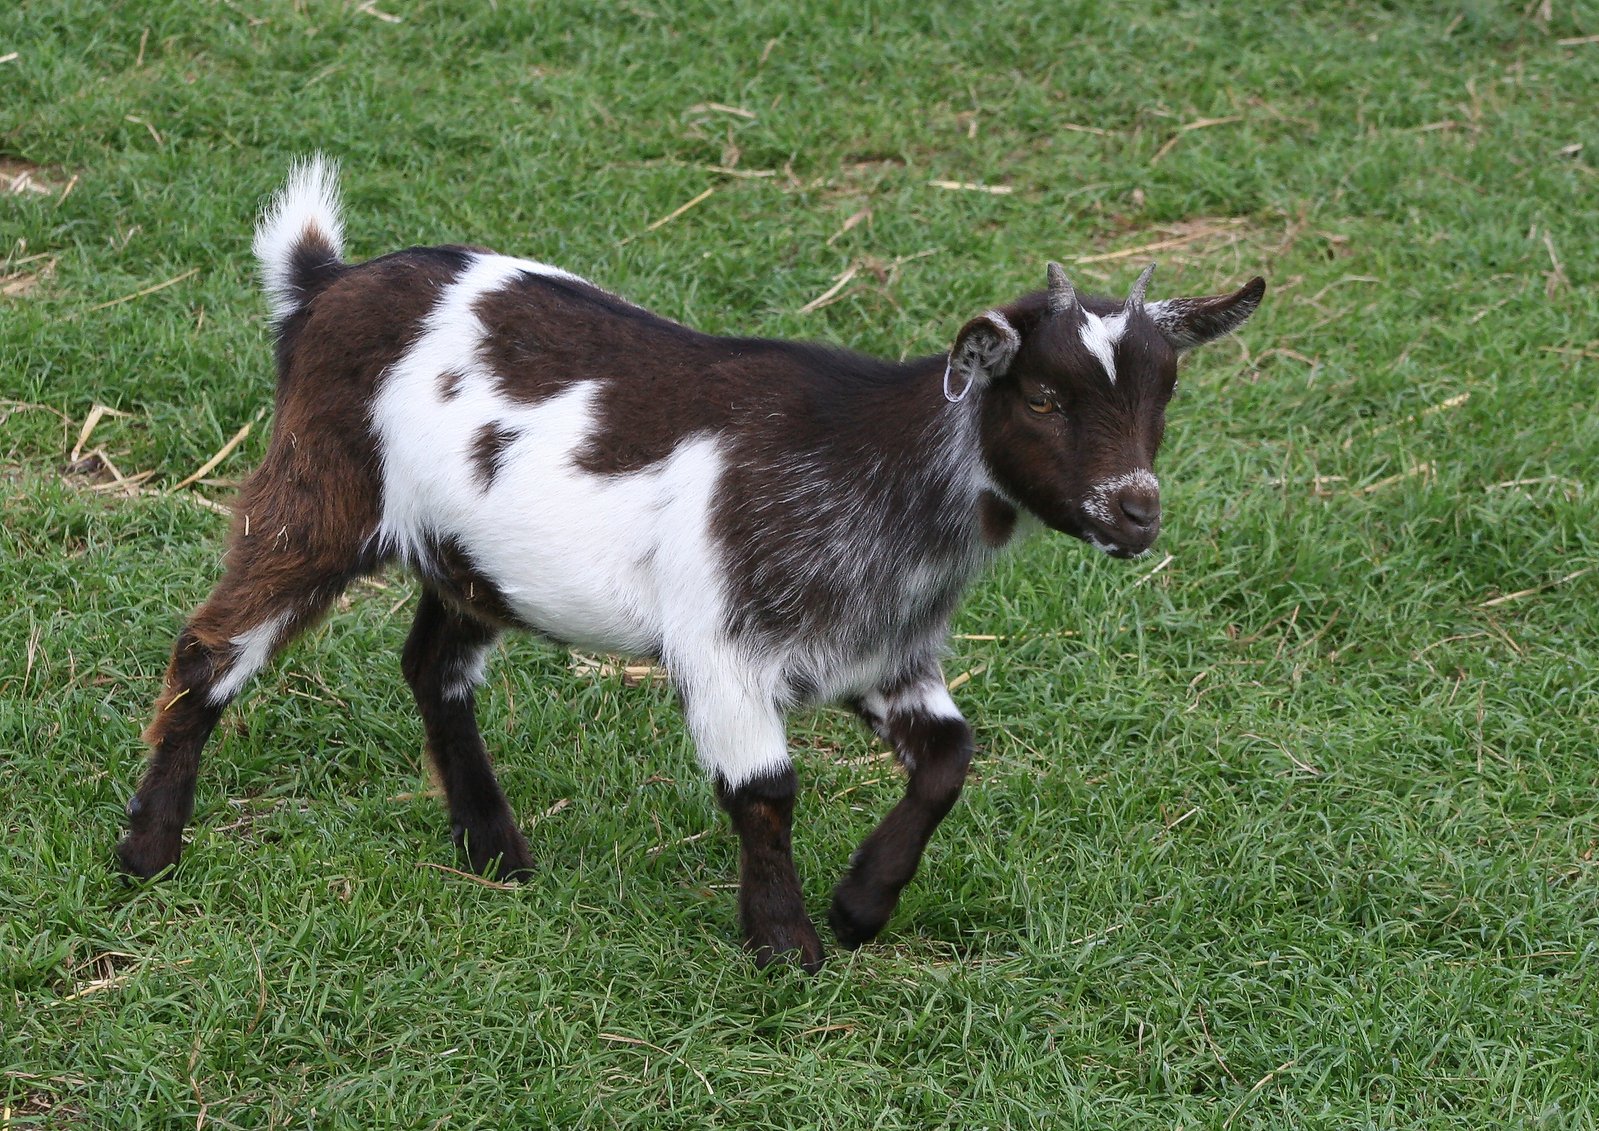 a young goat walking in the grass of an open field